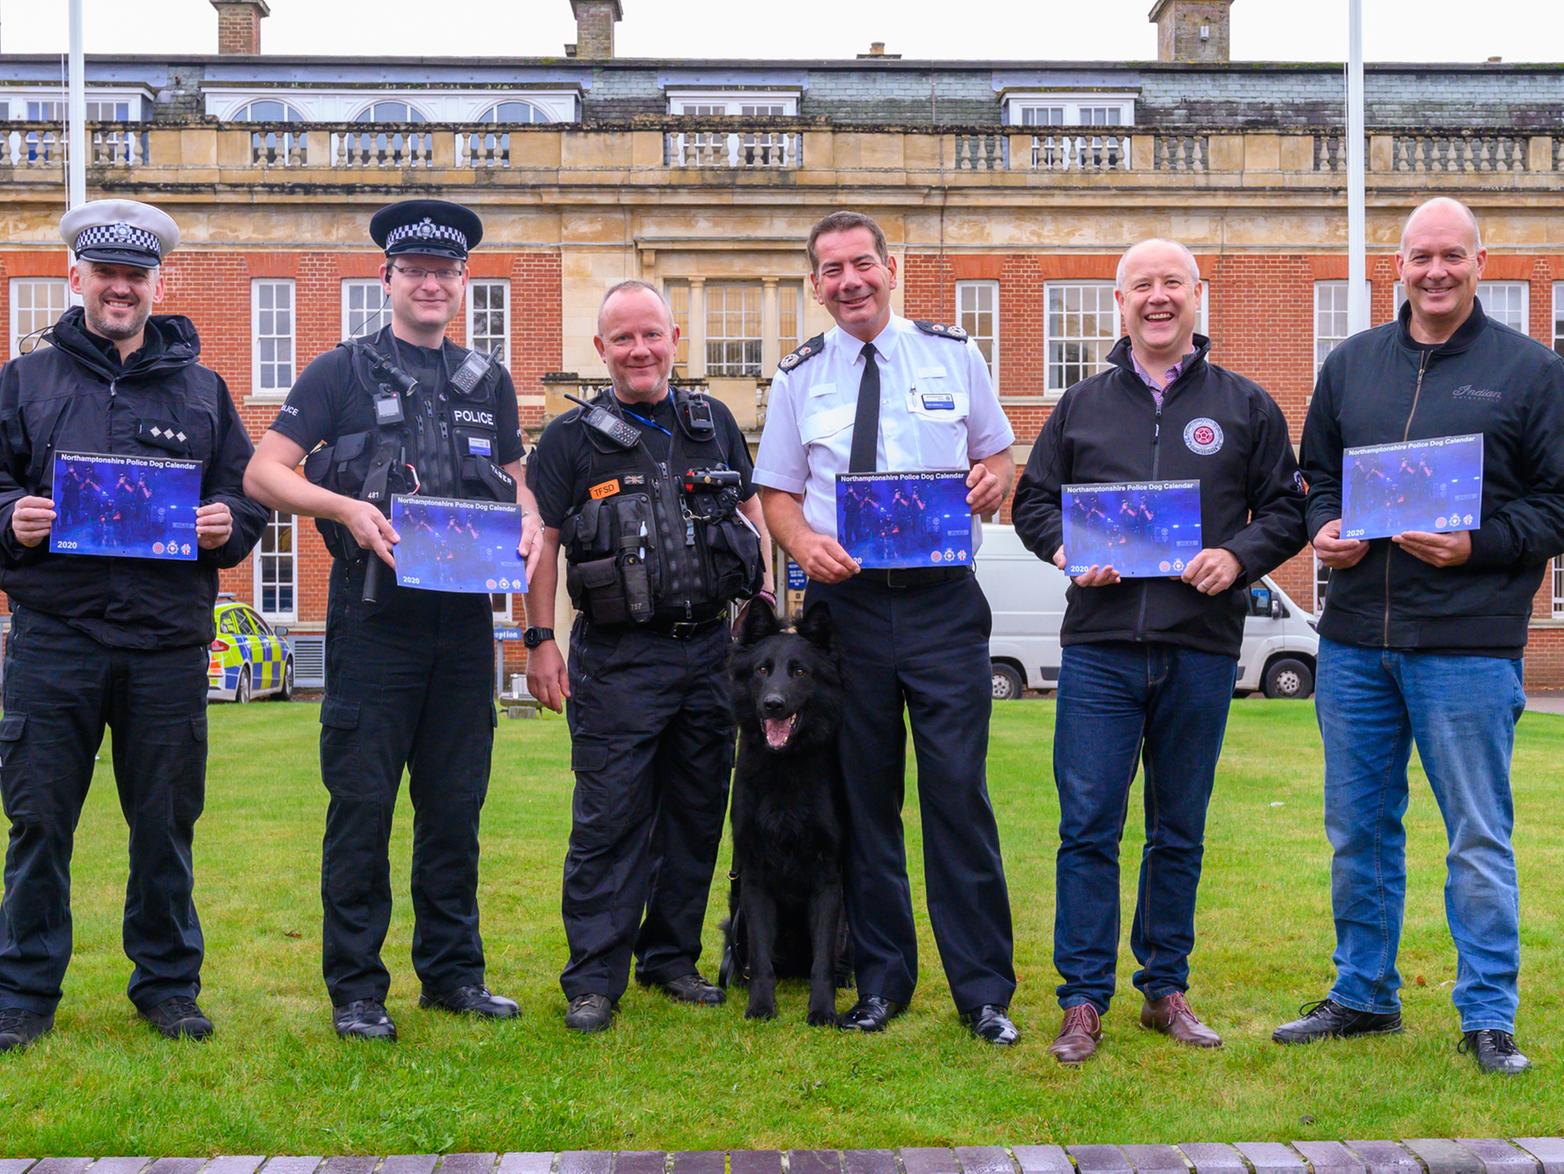 A fundraising calendar showing Northamptonshire Police's canine crimefighters in action is now on sale.